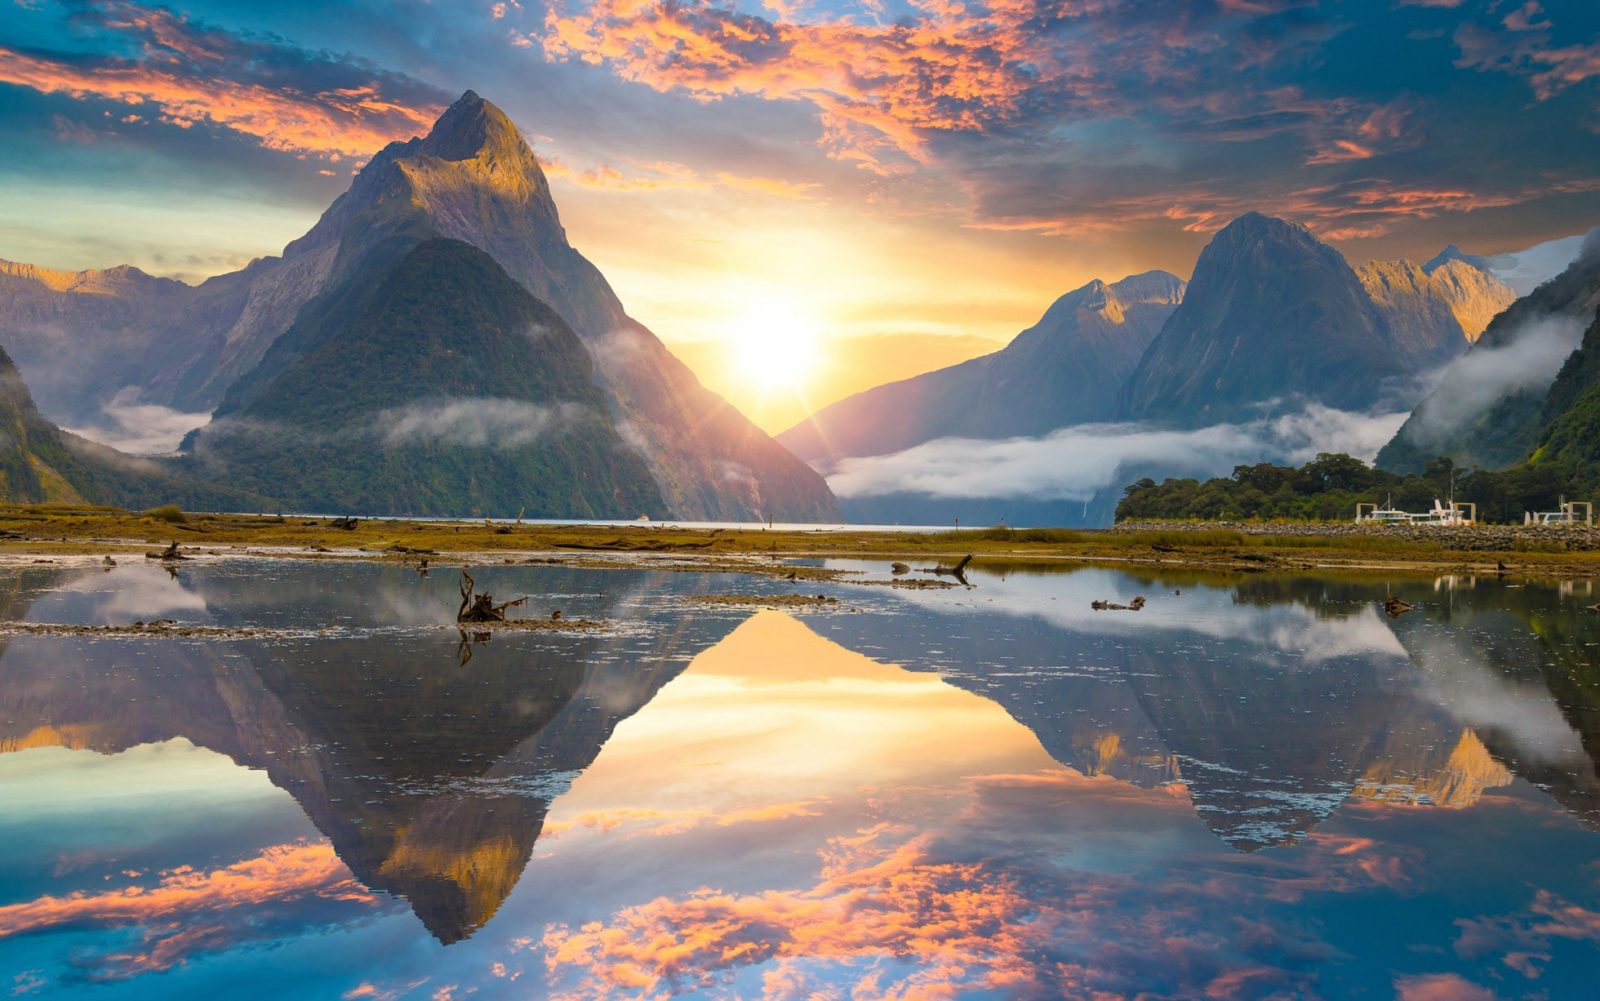 We’ll Give You an 🌮 International Food to Try Based on the ✈️ Places You Would Rather Visit Milford Sound, New Zealand